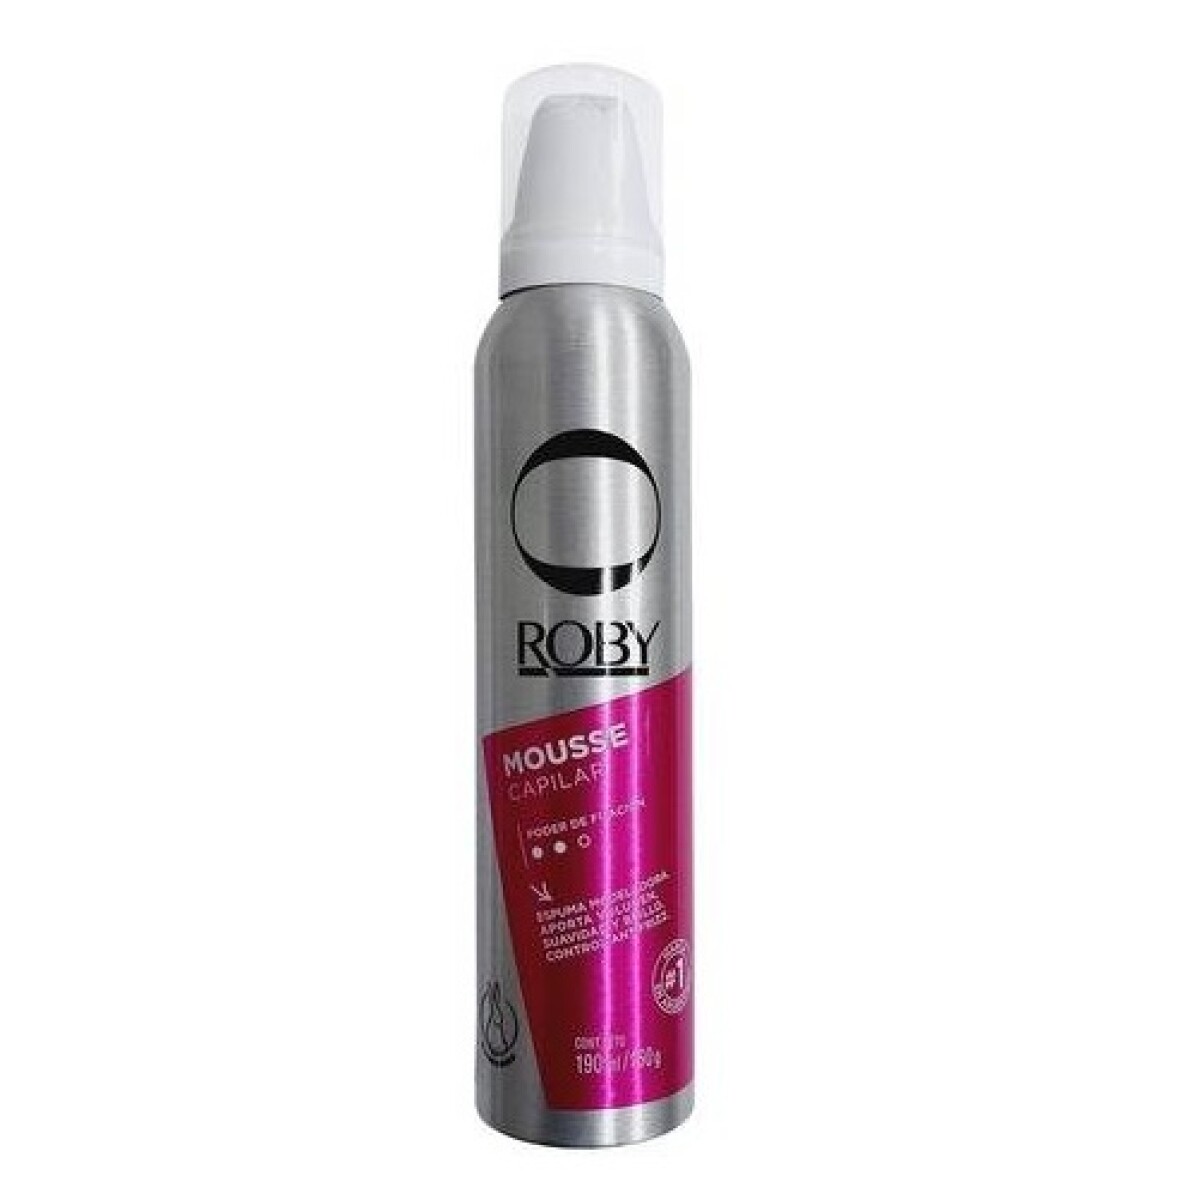 Mousse Capilar Roby 190ml. 